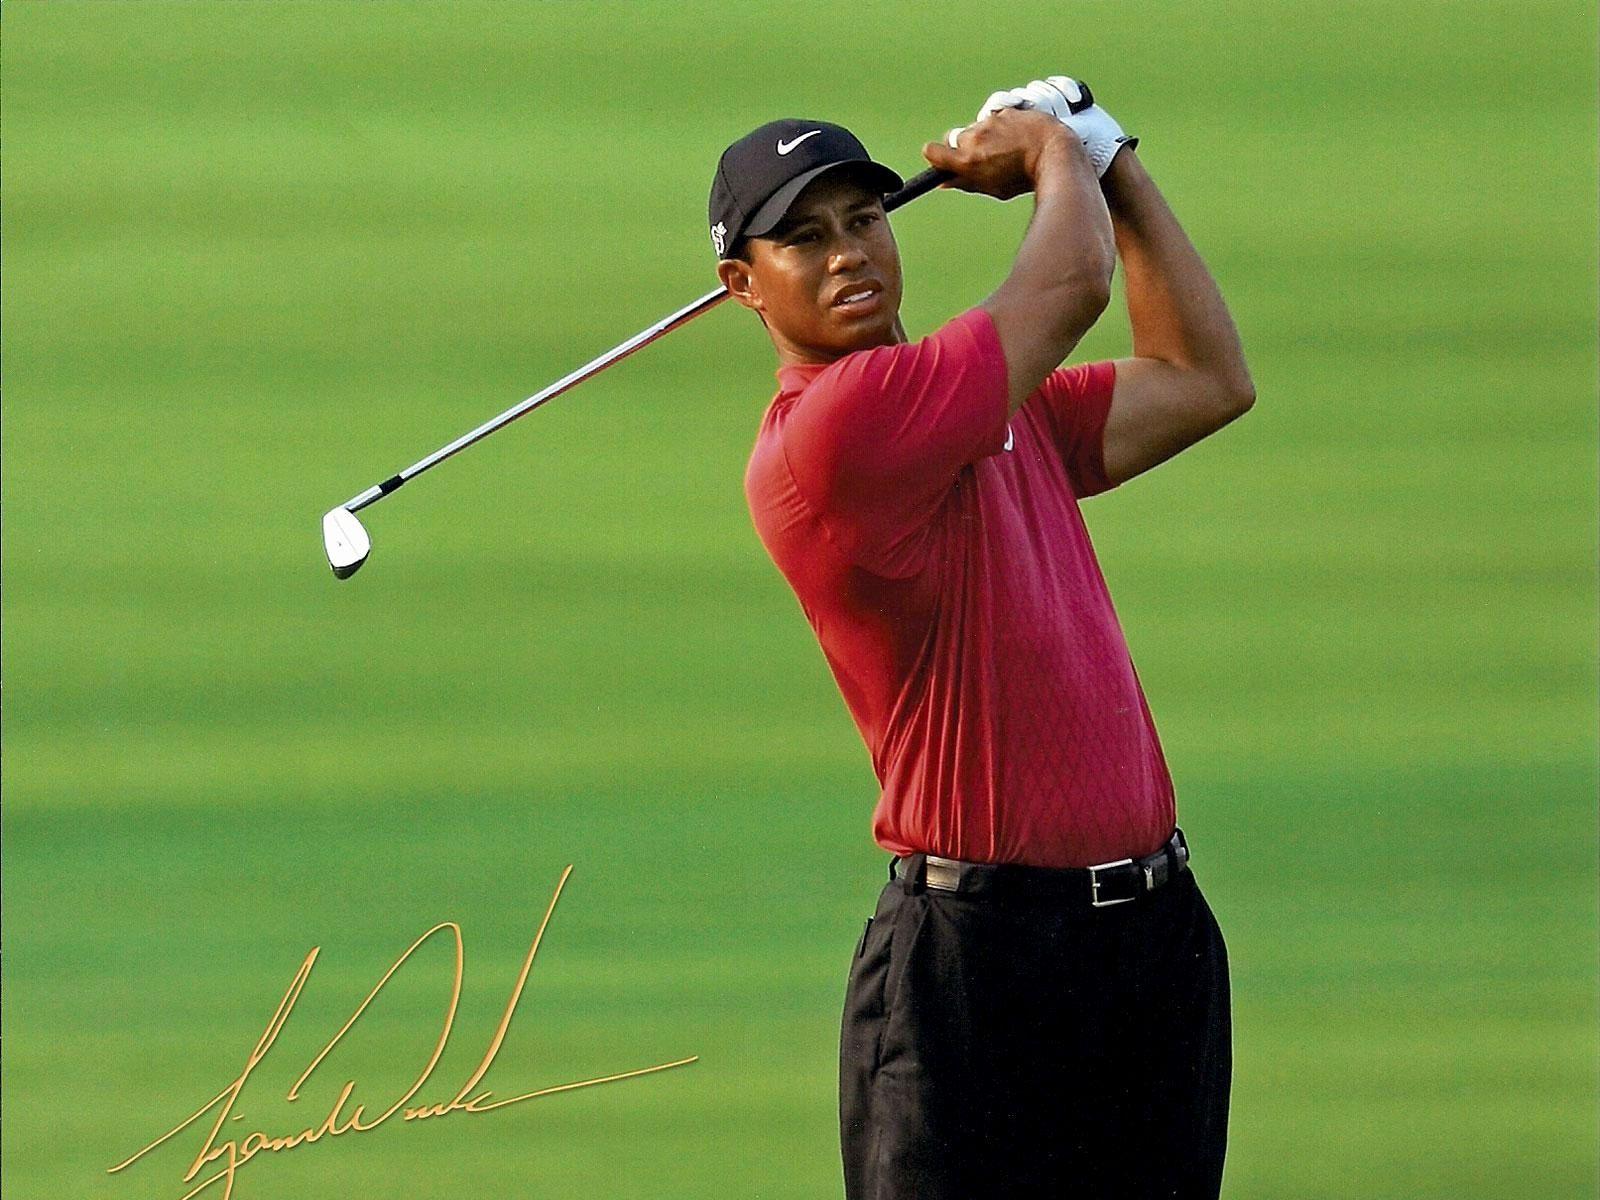 Tiger Woods Wallpapers Lovely Awesome Tiger Woods Wallpapers Full Hd.